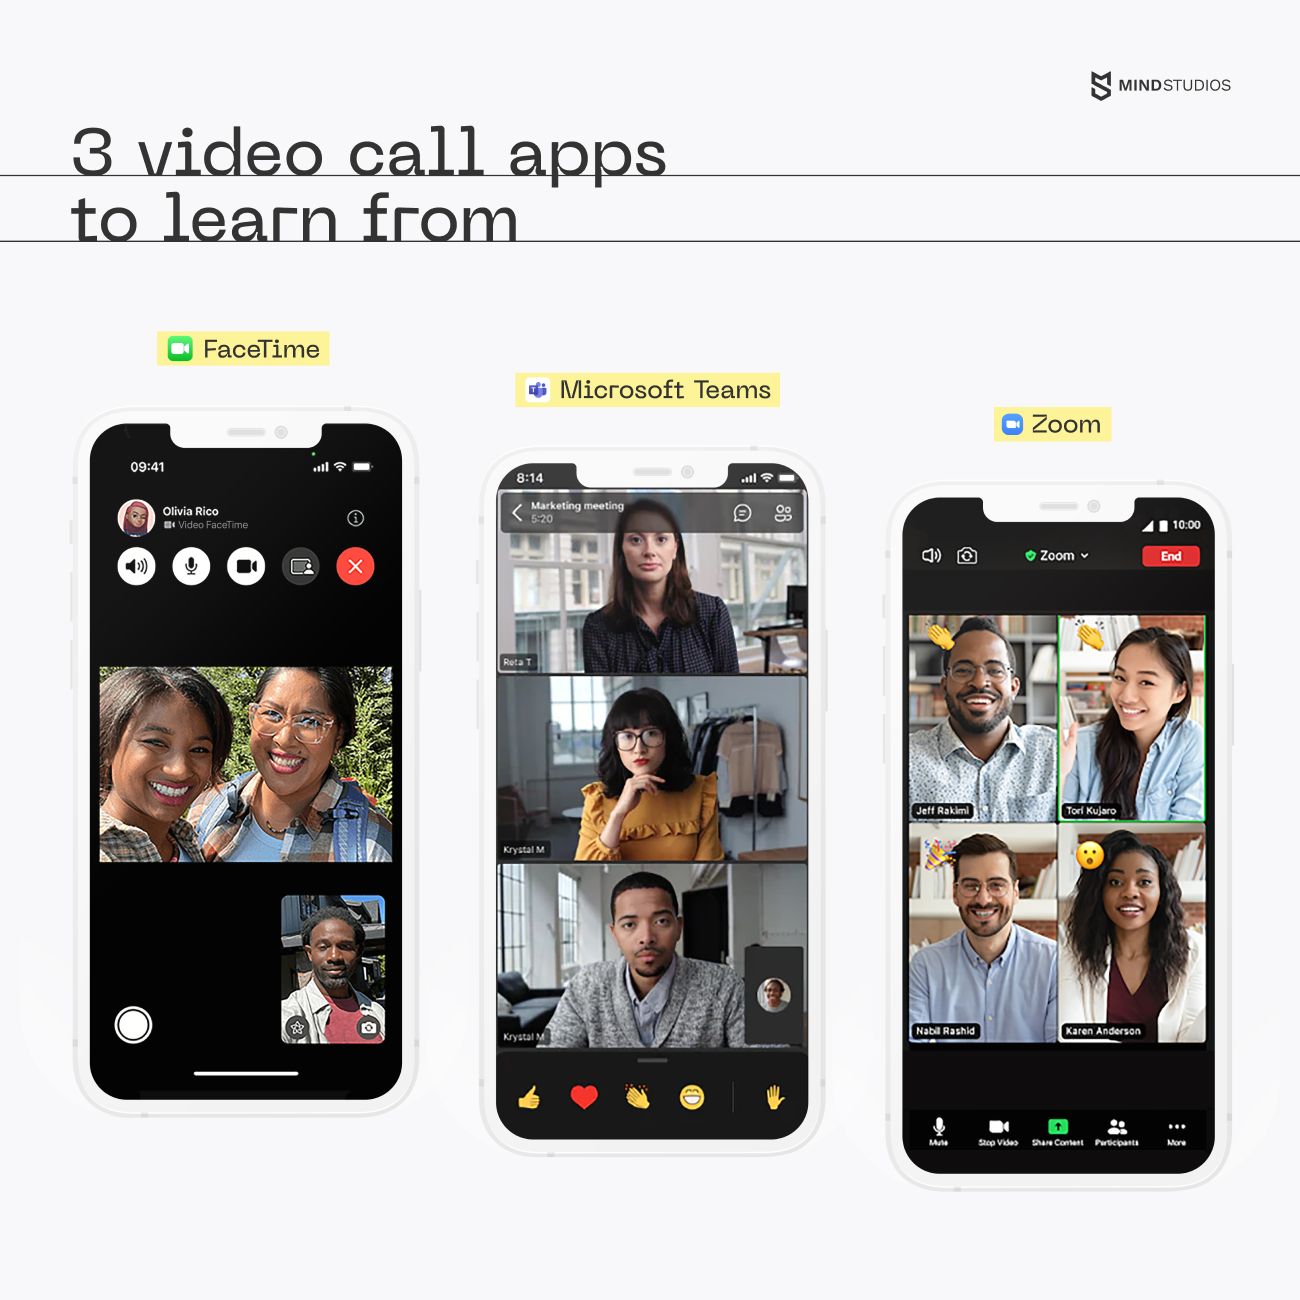 3 video call apps to learn from